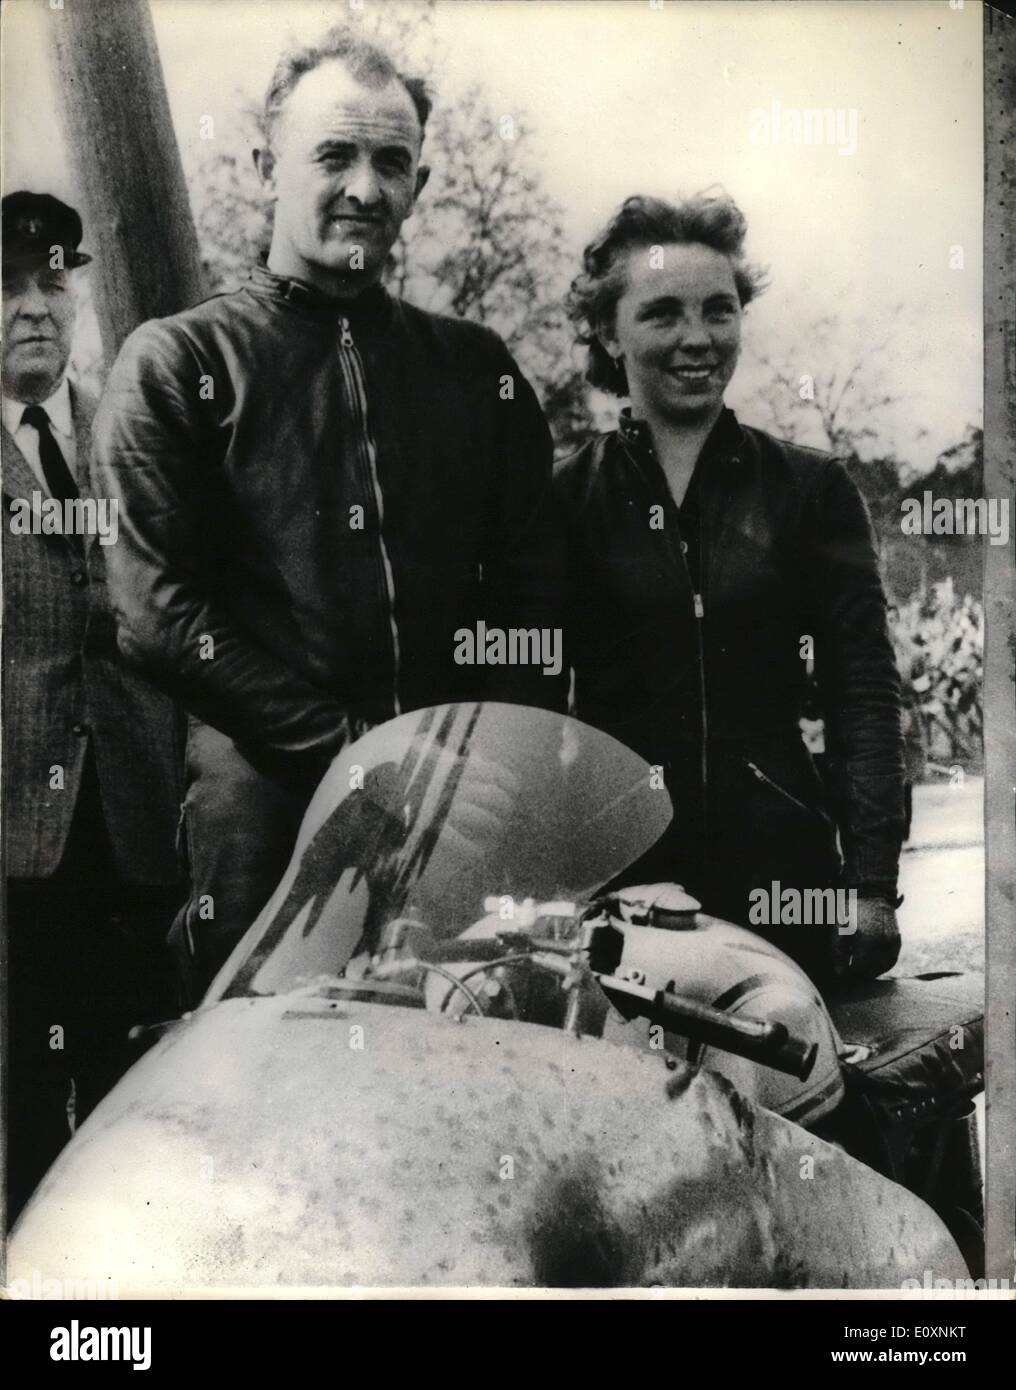 Jun. 17, 1967 - The International Motor Cycle and car races- the biggest in Scandinavia- were jheld in Helsinki recently. The 500cc event-with sidecar- was won by French couple Jaques Drion with Ingeborg Stoll-the only woman competitor on a Norton. Keystone photo shows Jaques Drion and Ingeborg Stoll after their victory Stock Photo